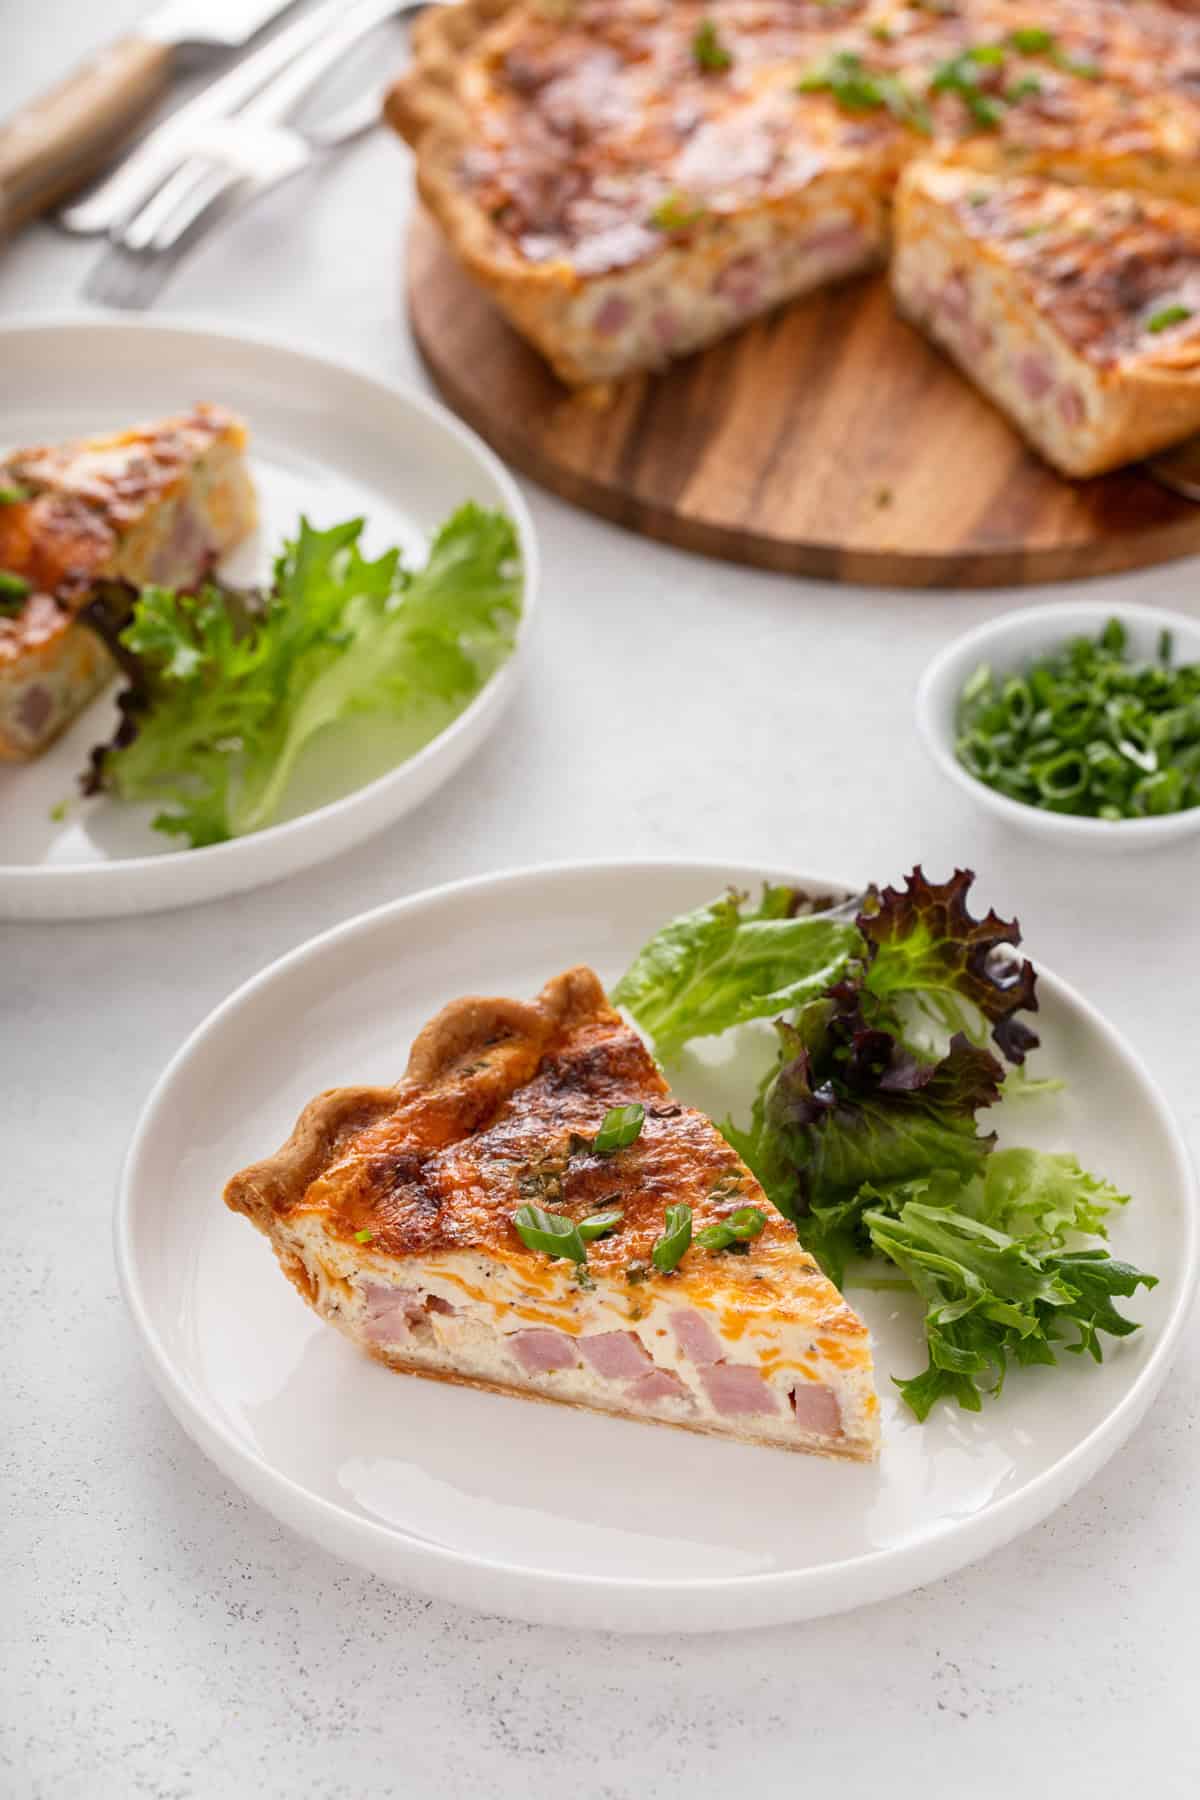 Two plates, each holding a slice of ham and cheese quiche next to fresh greens, with the rest of the quiche in the background.